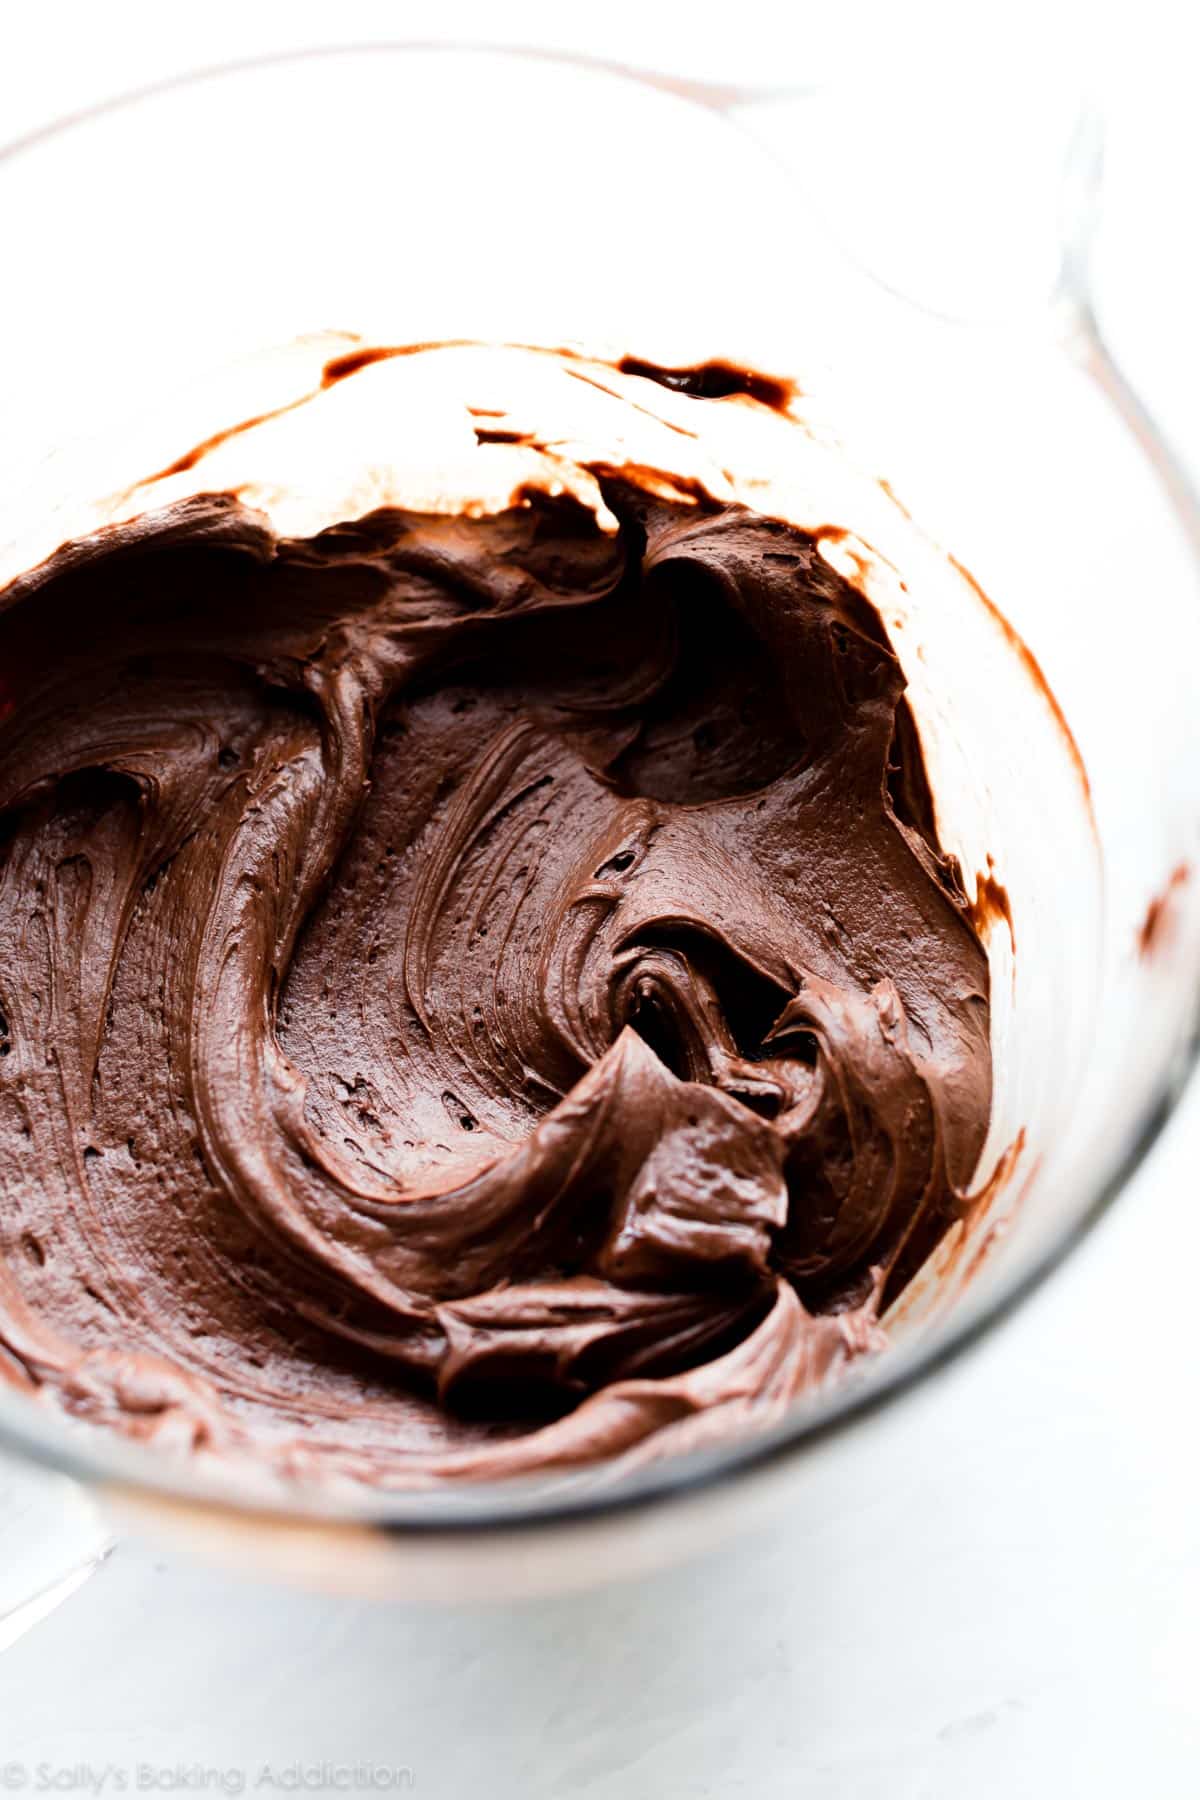 Chocolate frosting in glass bowl